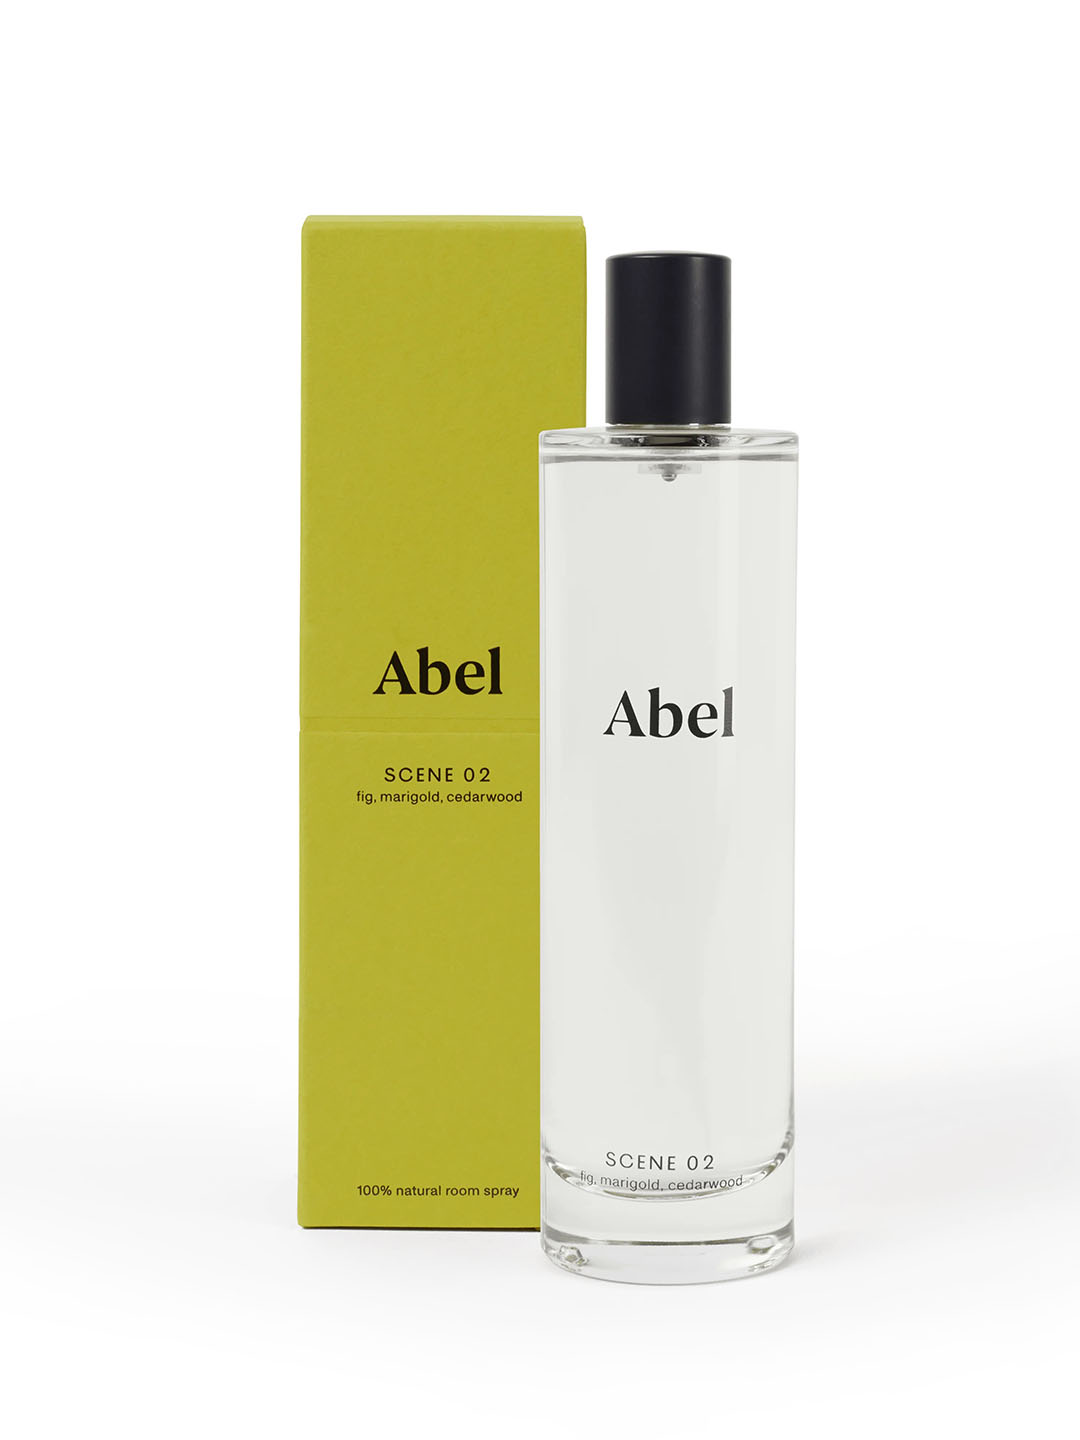 A bottle of Abel Room Spray – Scene 02 ⋅ fig, marigold, cedarwood with its packaging, showcasing a simple and minimalistic design.